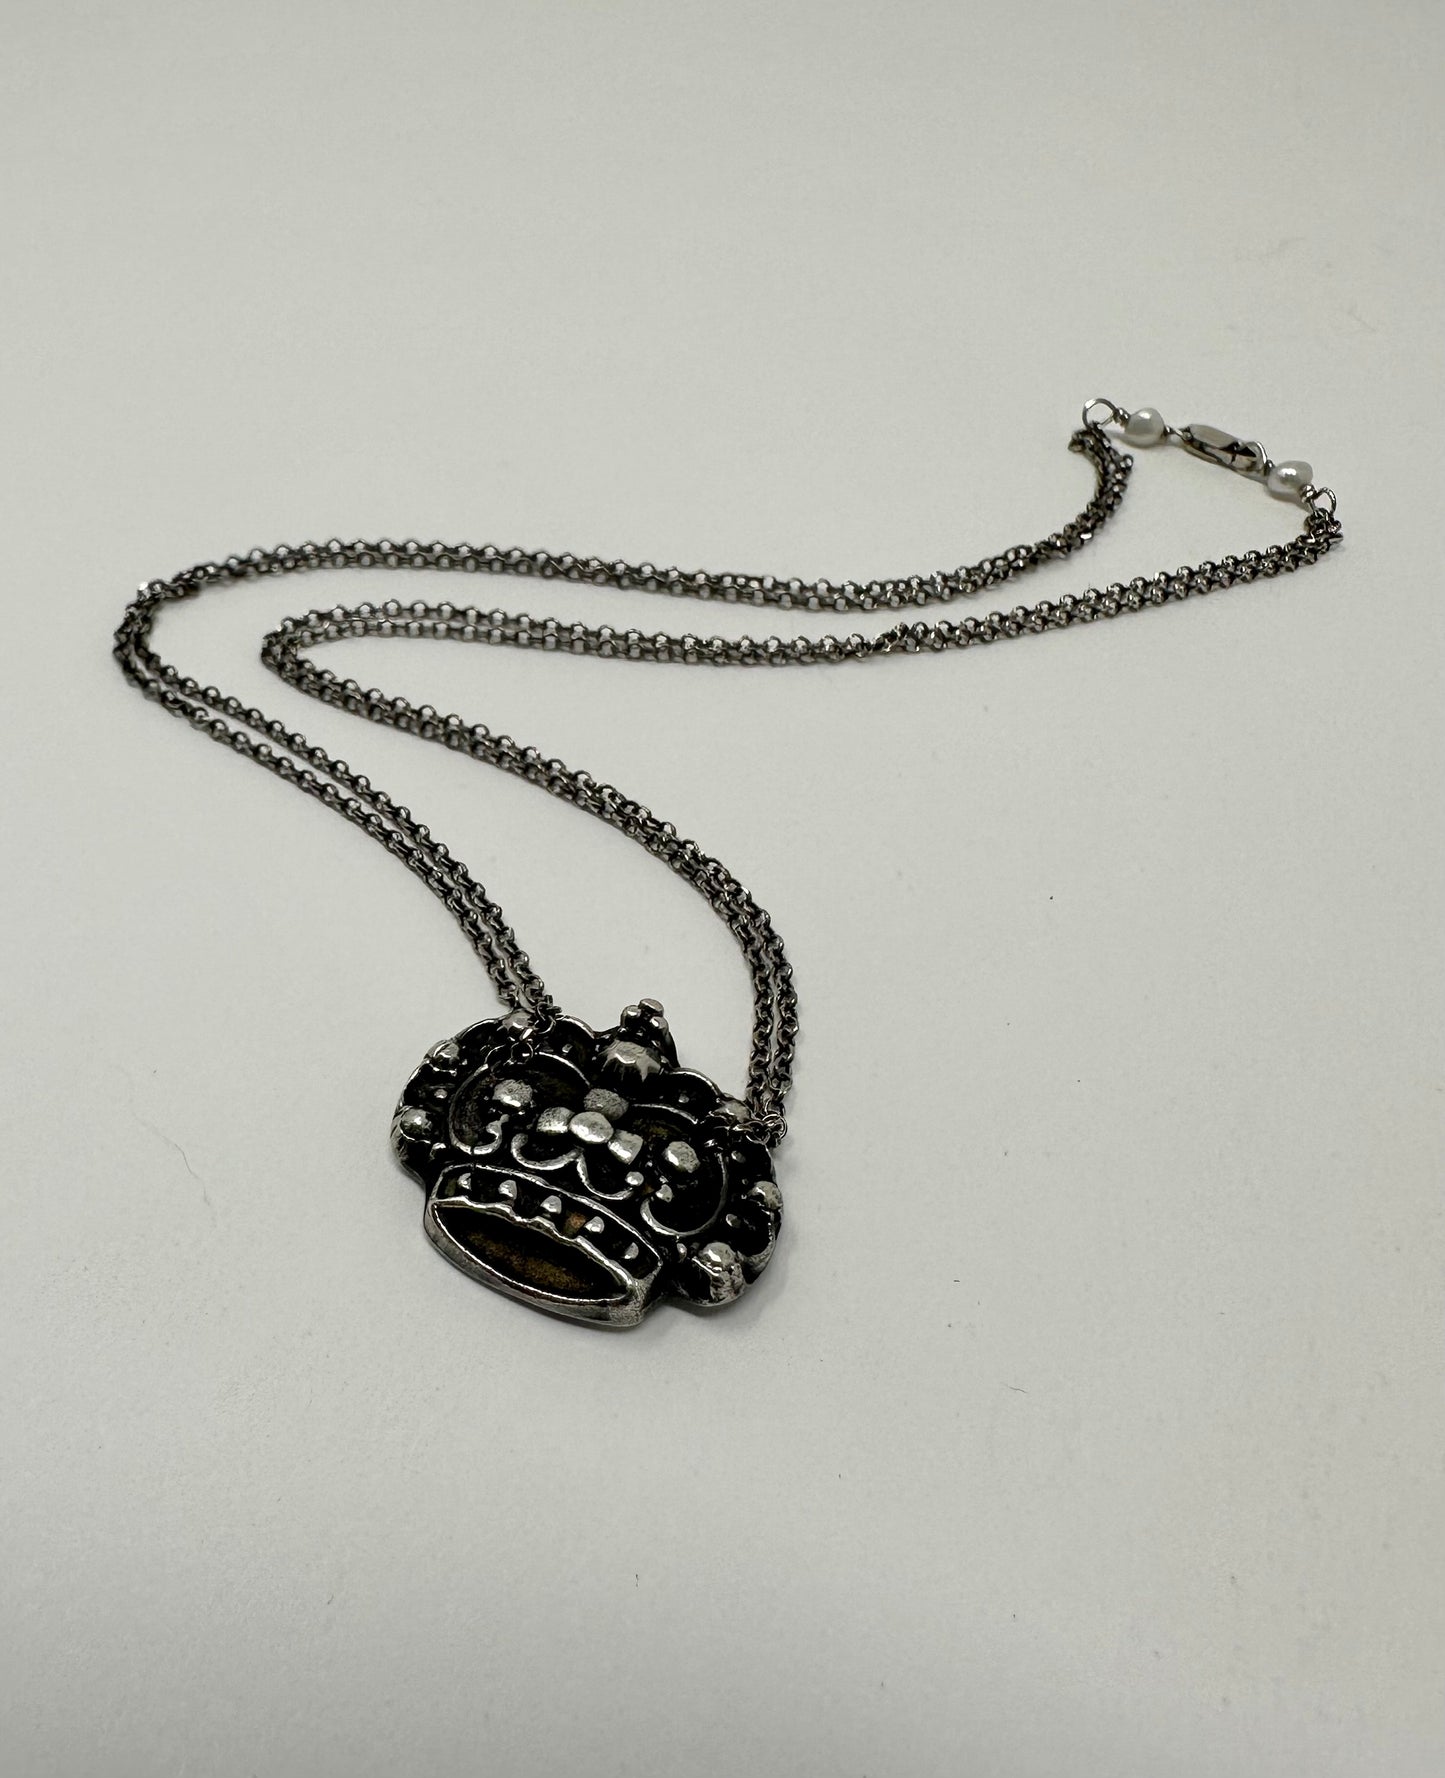 Crown vintage inspired pendant necklace